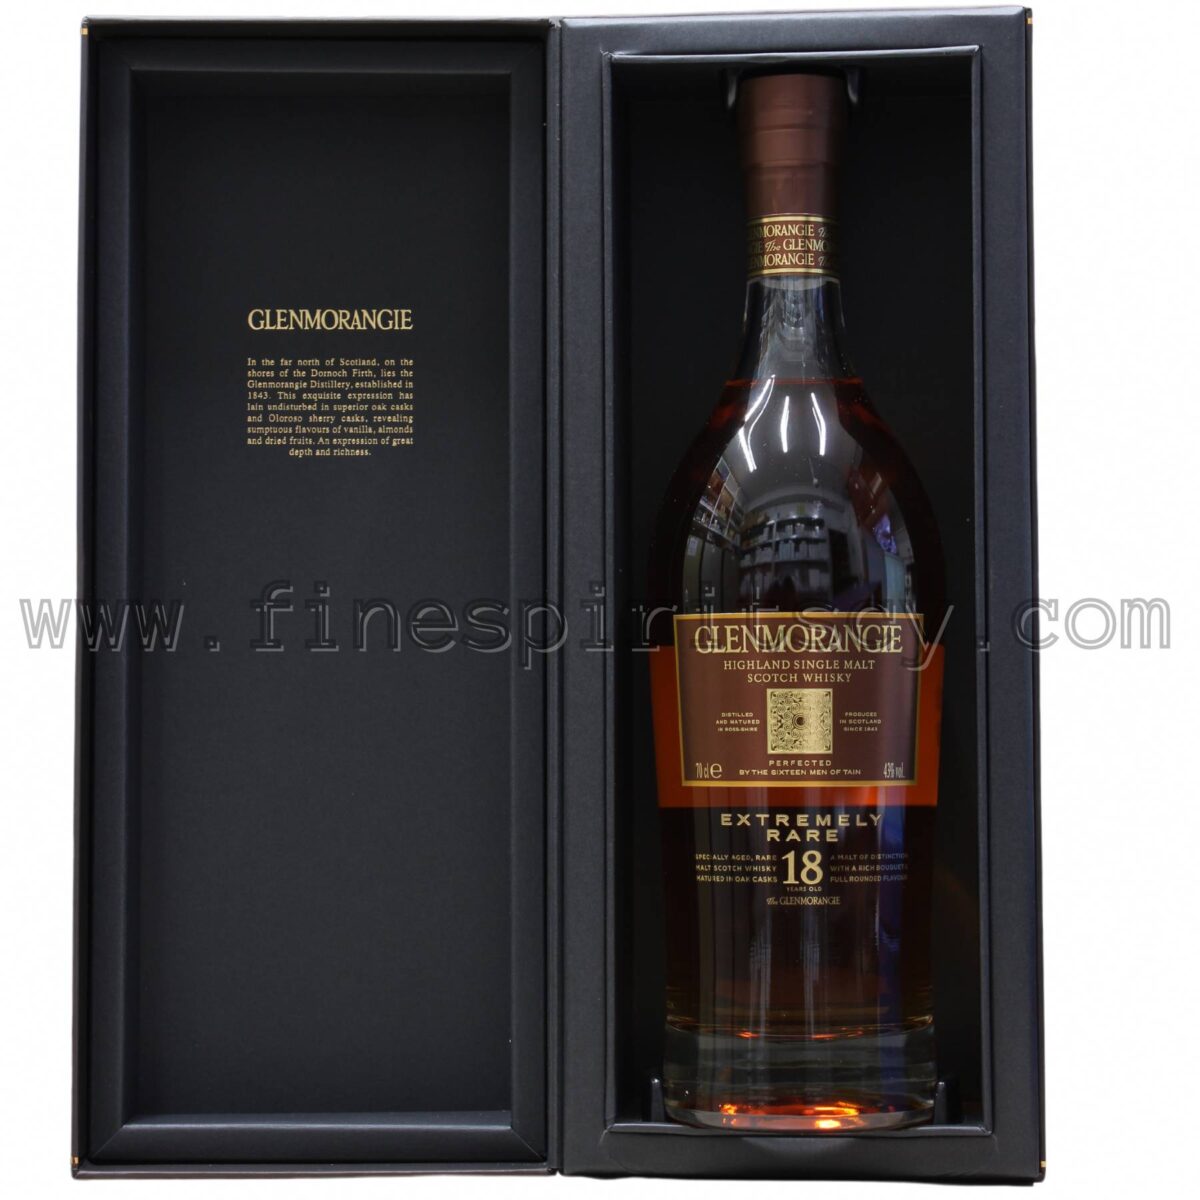 Glenmorangie 18 Year Old Extremely Rare Open Box Bottle Inside 700ml 70cl 0.7L